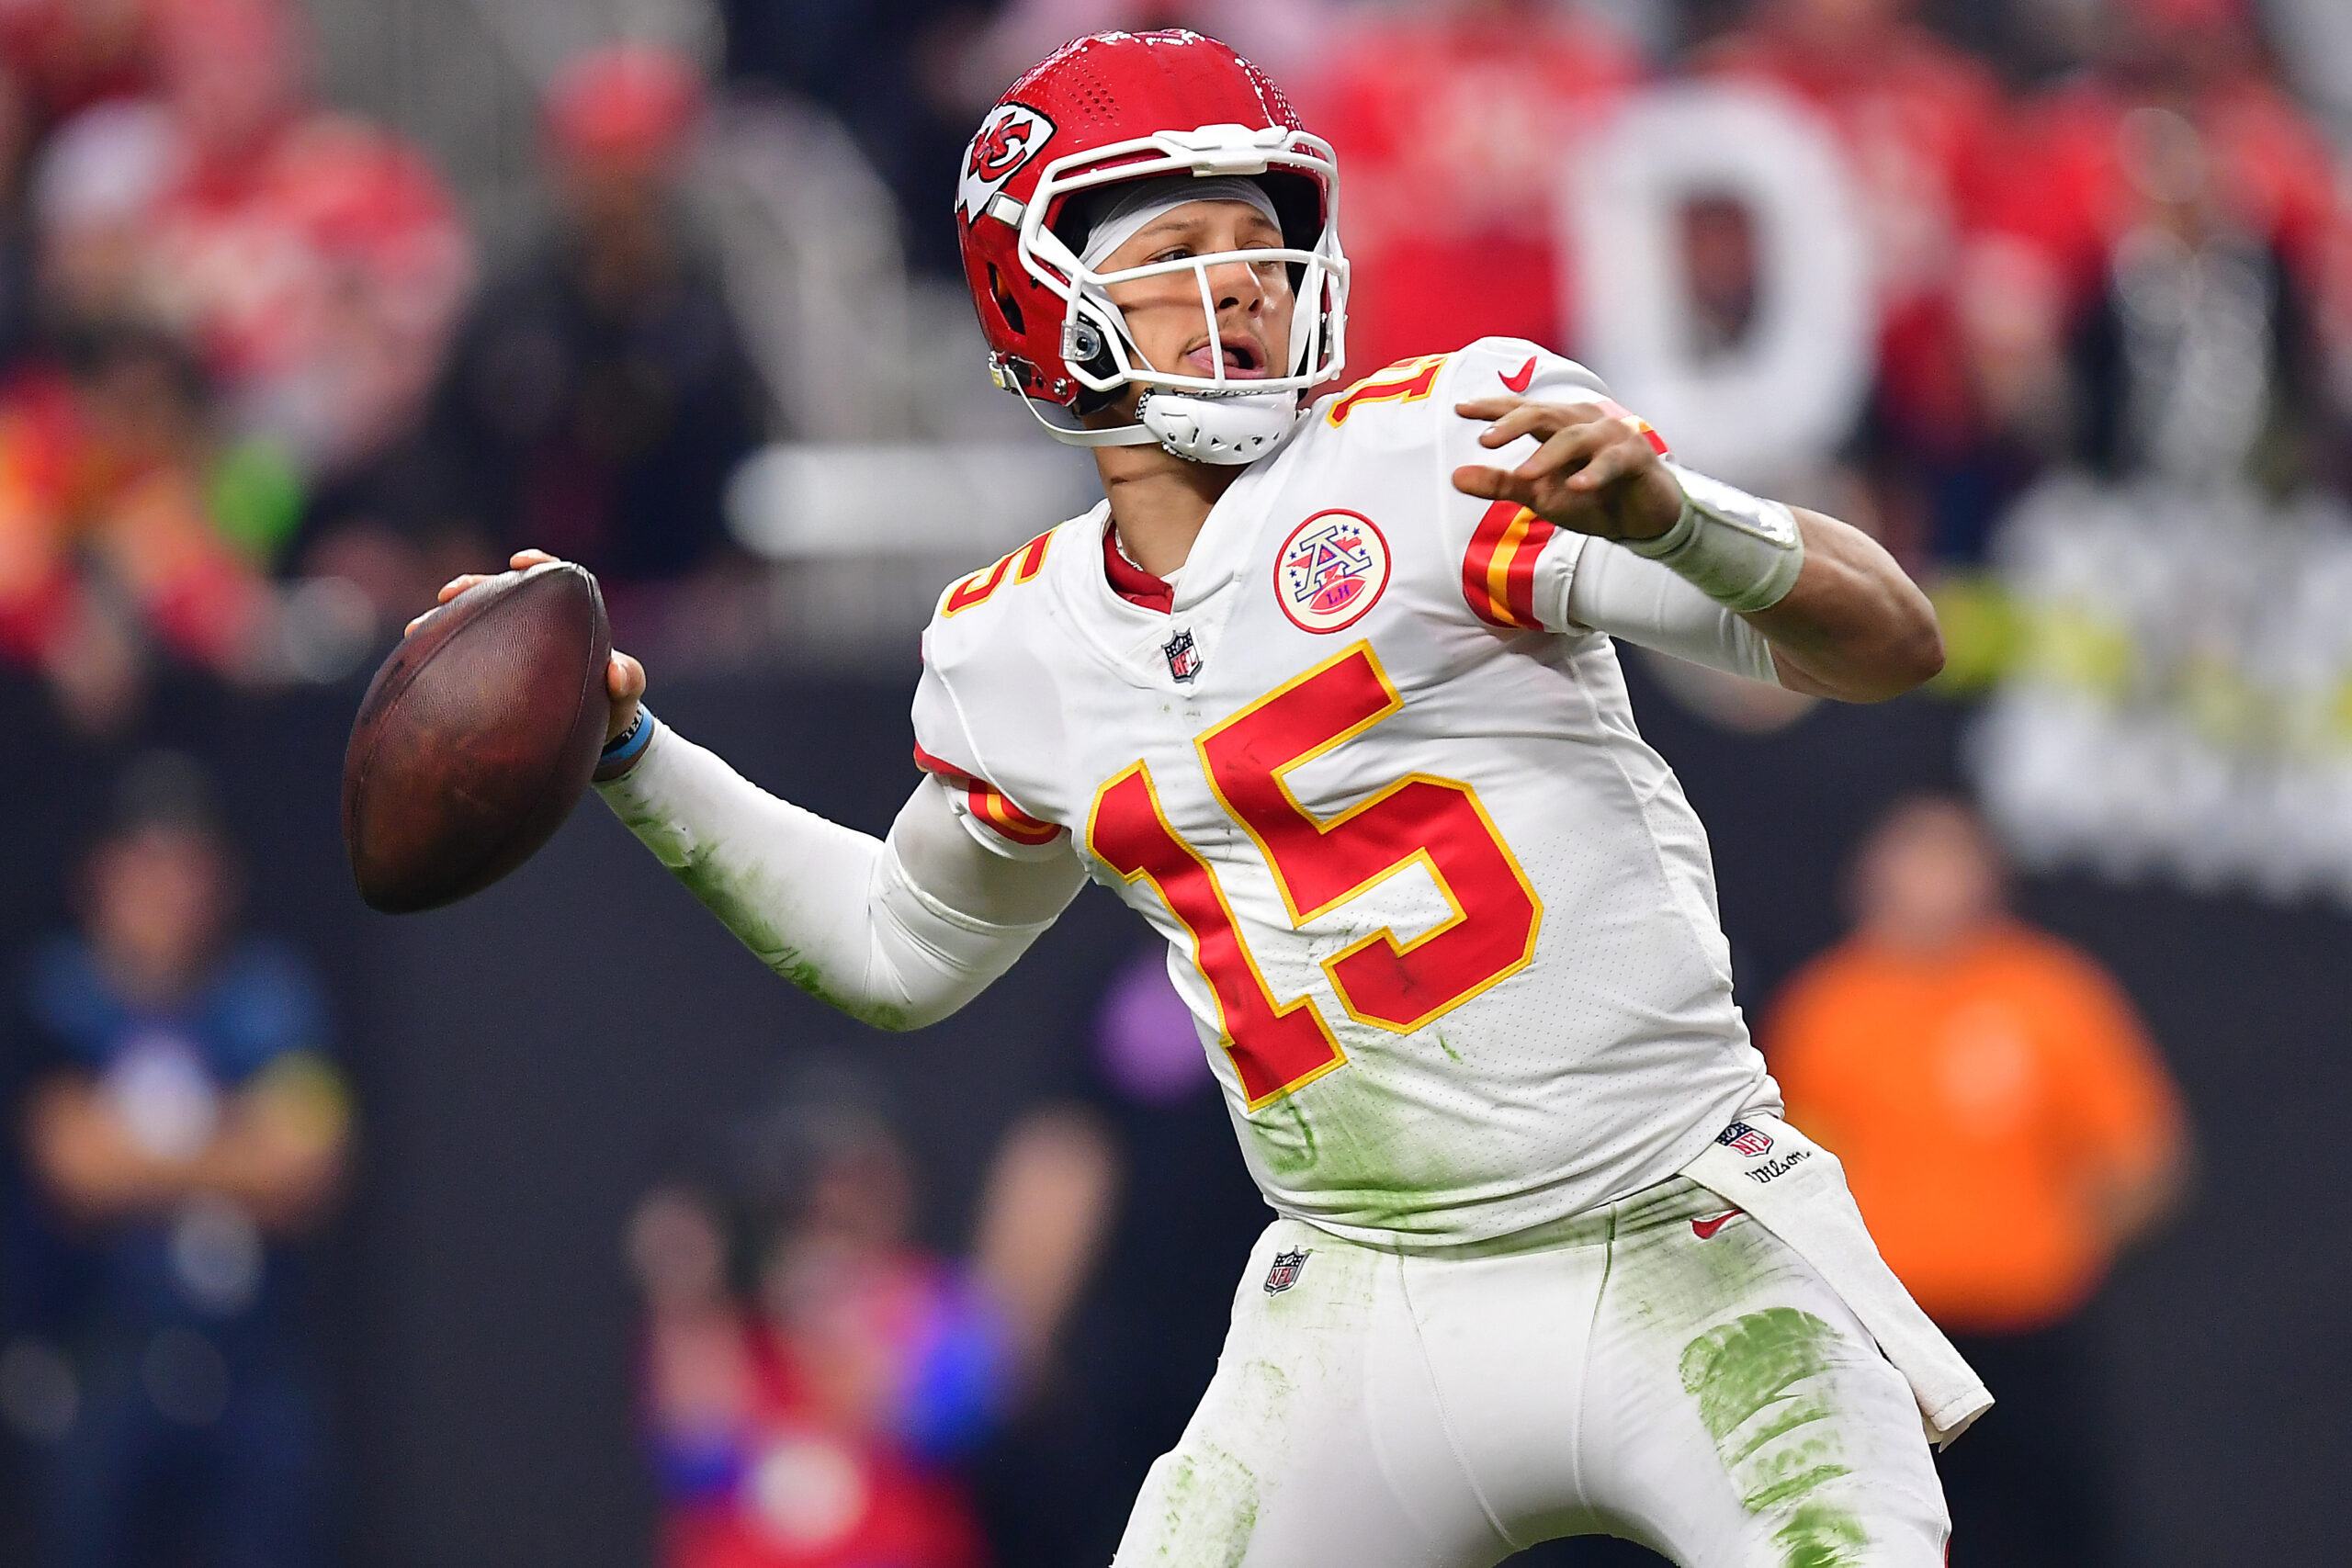 Chiefs QB Patrick Mahomes sets NFL record for most single season offensive yards